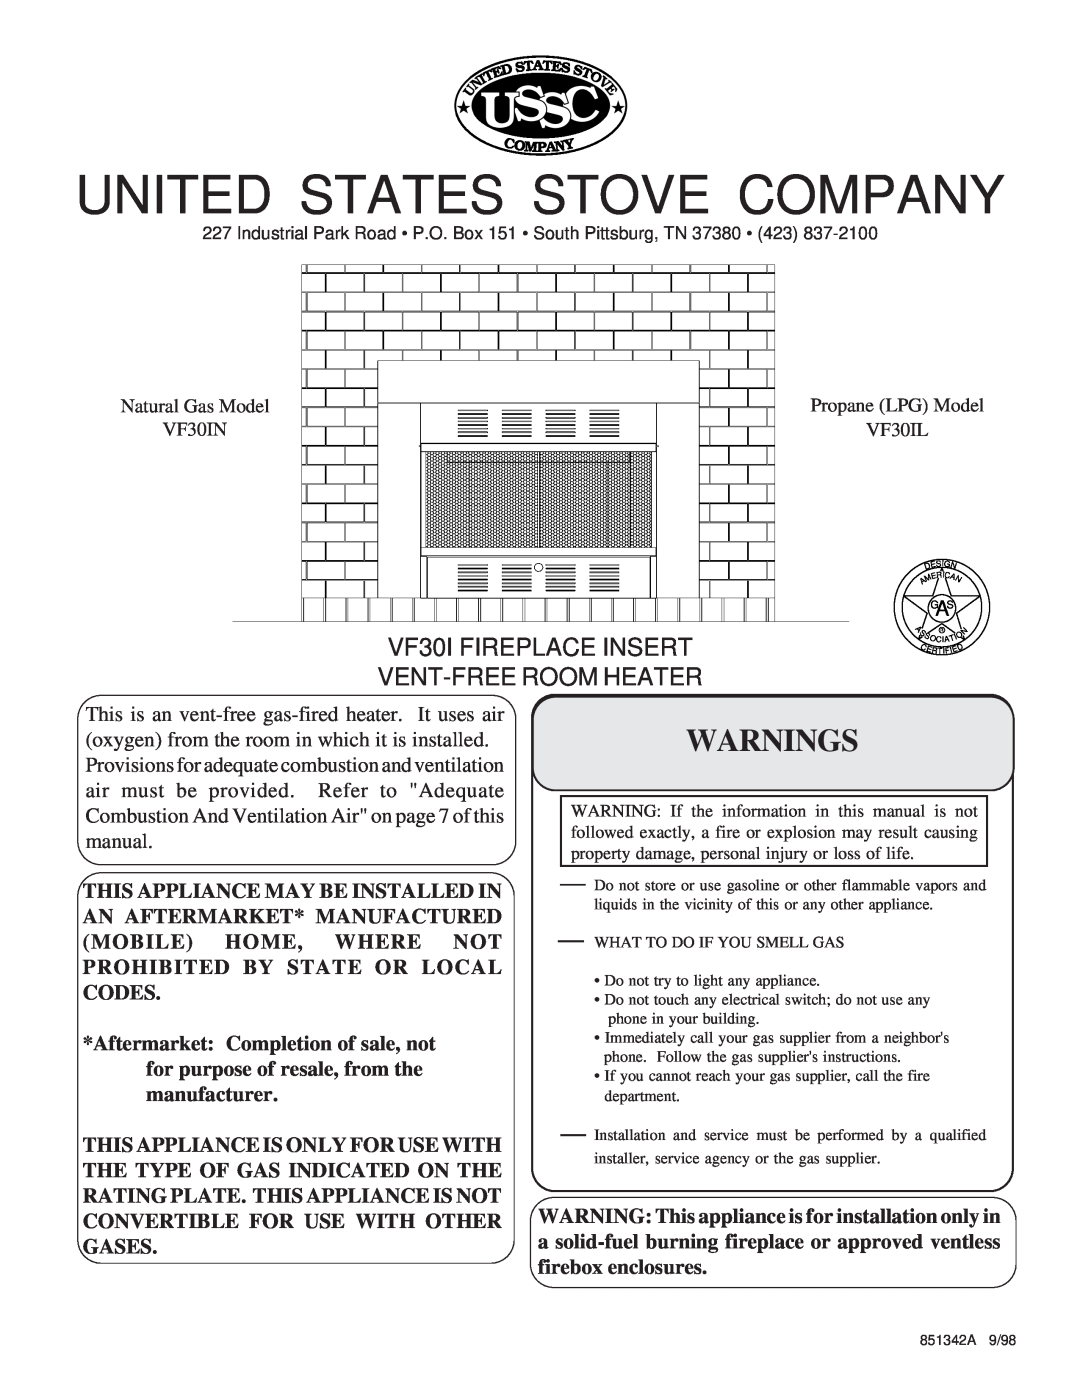 United States Stove VF30IL manual Ussc, Warnings, United States Stove Company, Natural Gas Model VF30IN, Es S, 851342A 